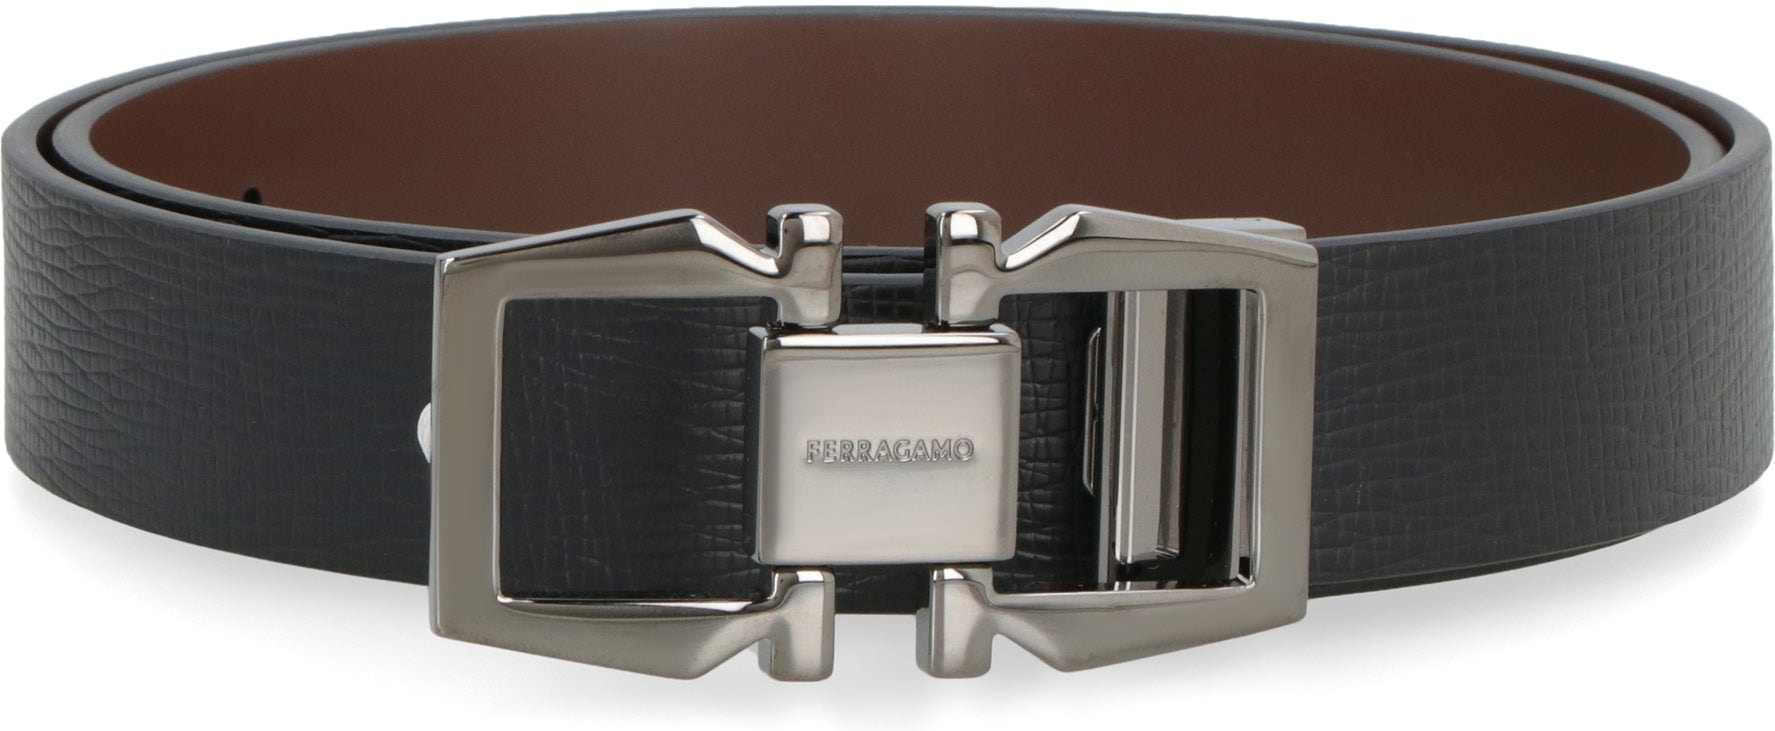 Is this ferragamo belt buckle real or fake? Help is appreciated